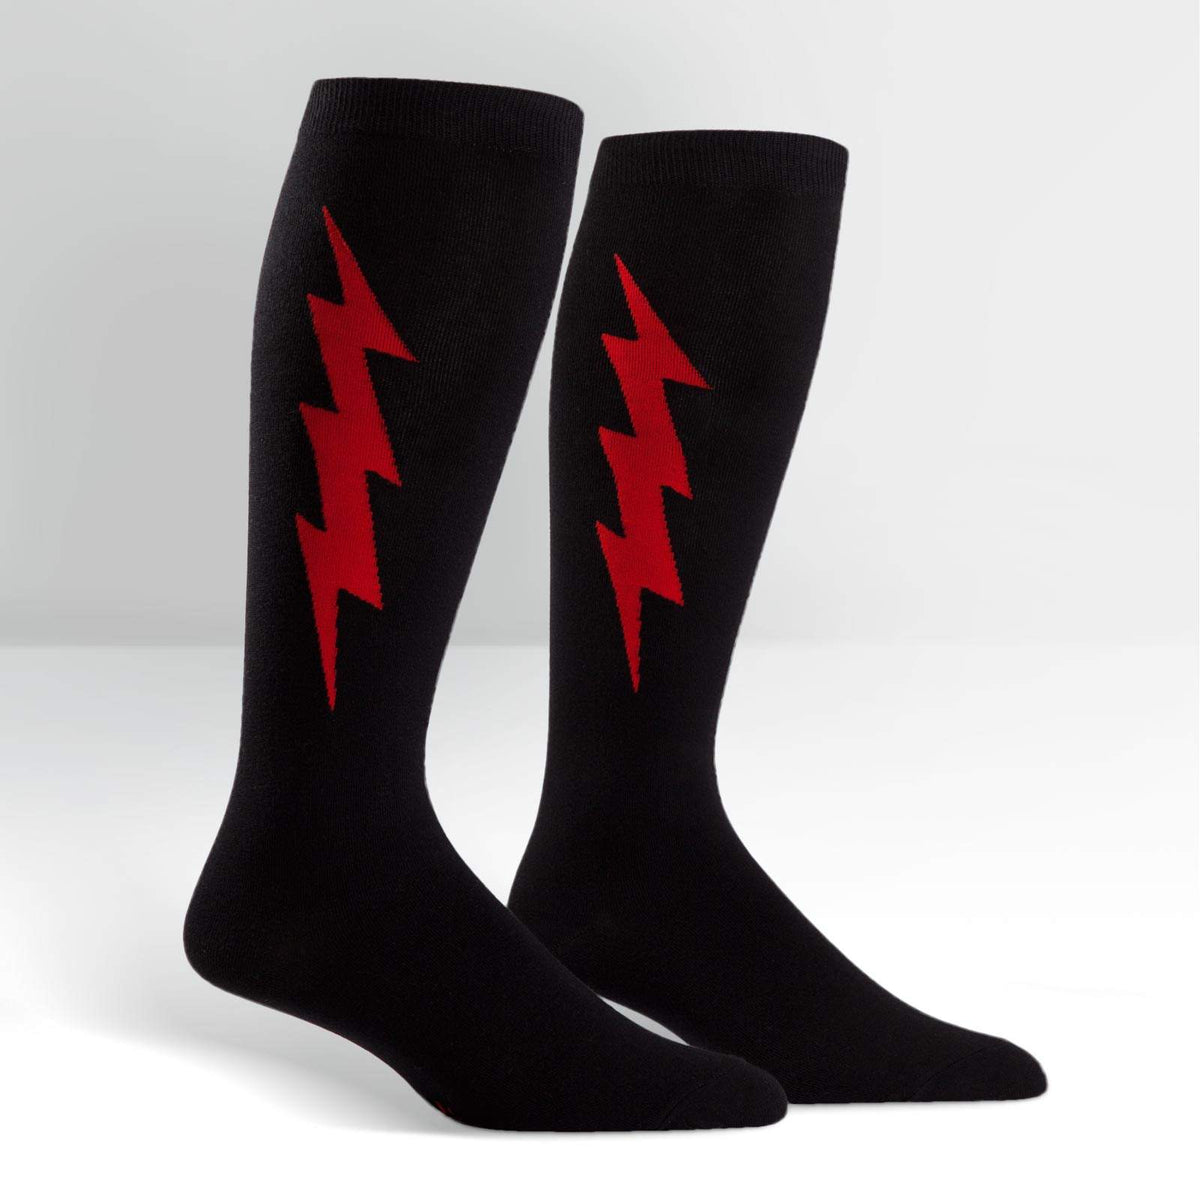 Sock It To Me Super Hero! extra-stretchy knee high